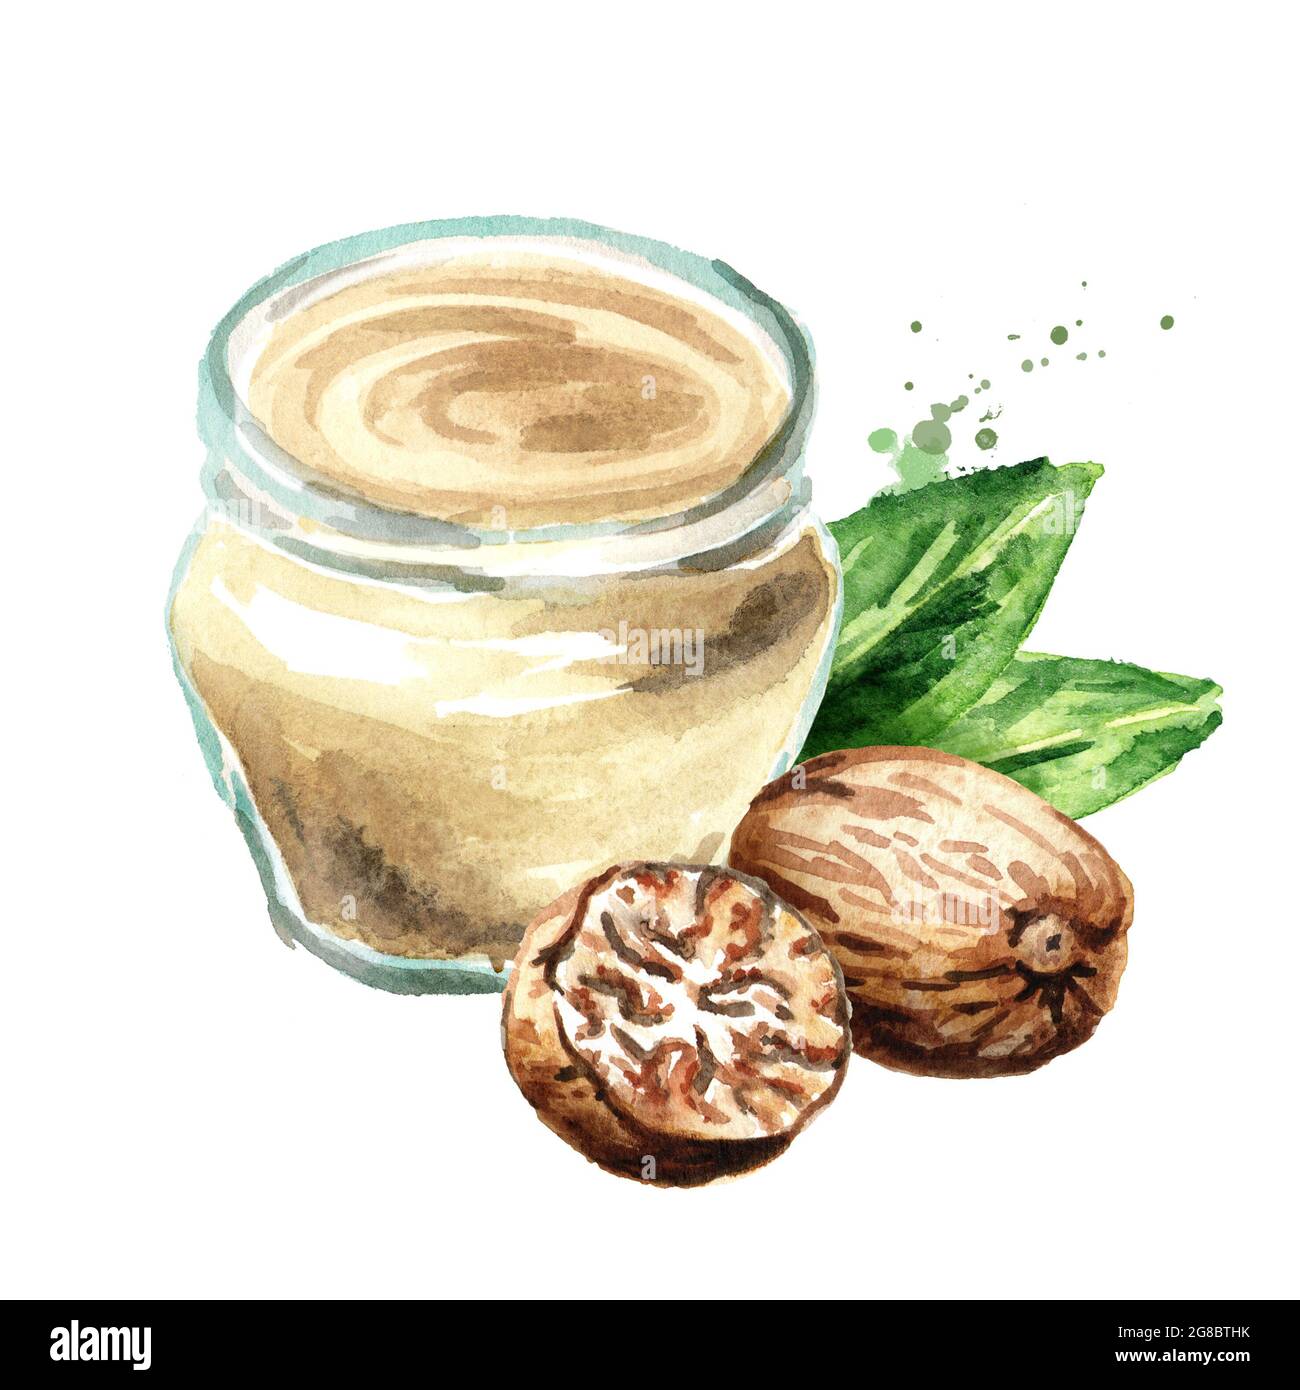 Bechamel sauce with nutmeg. Watercolor hand drawn illustration, isolated on white background Stock Photo